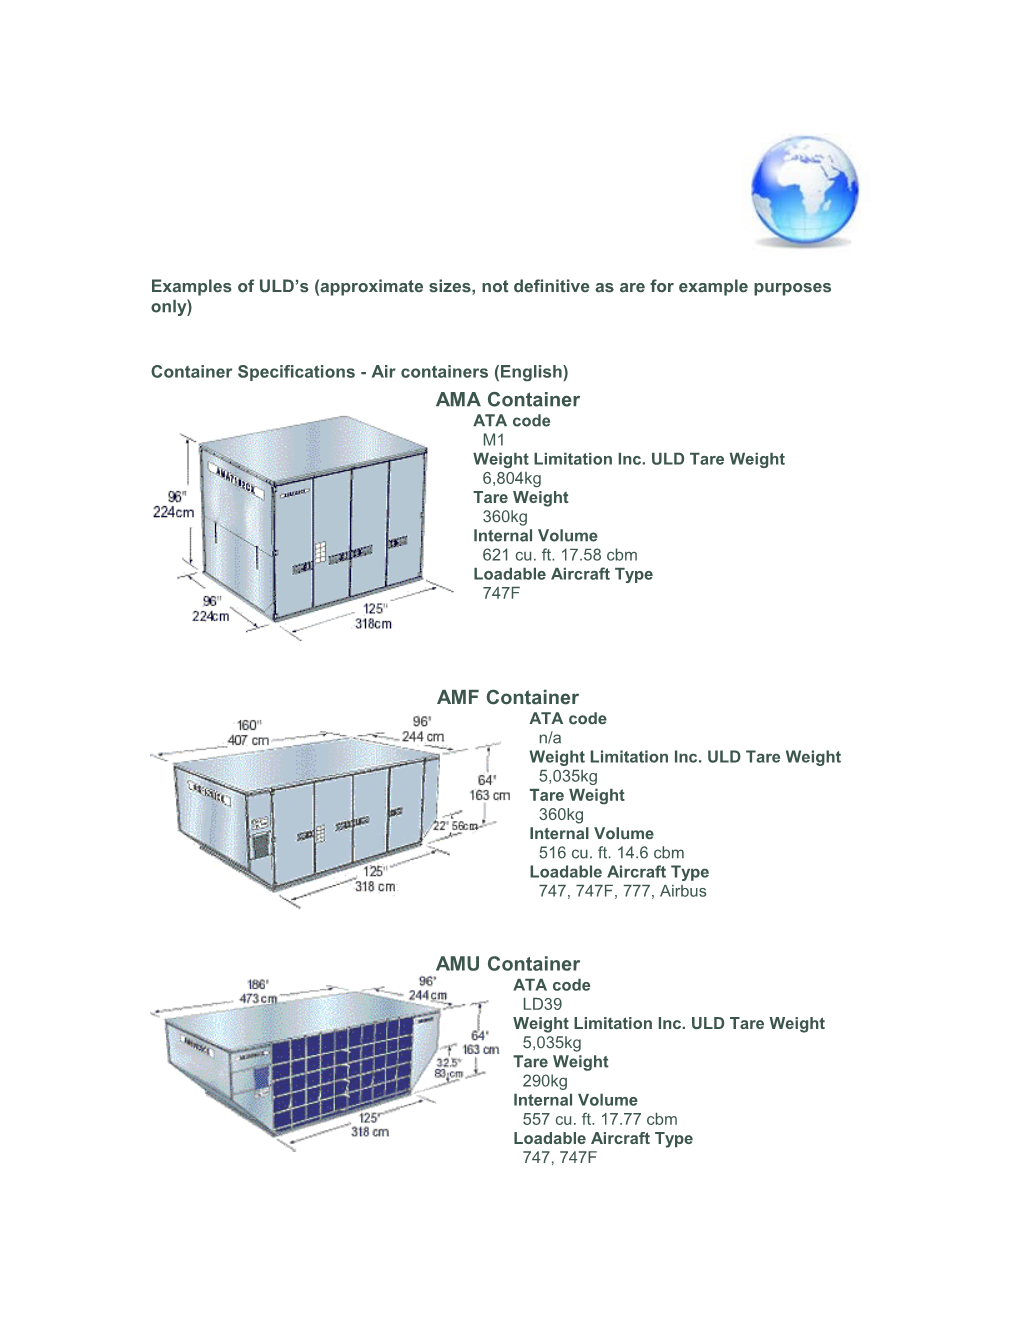 Container Specifications - Air Containers (English)